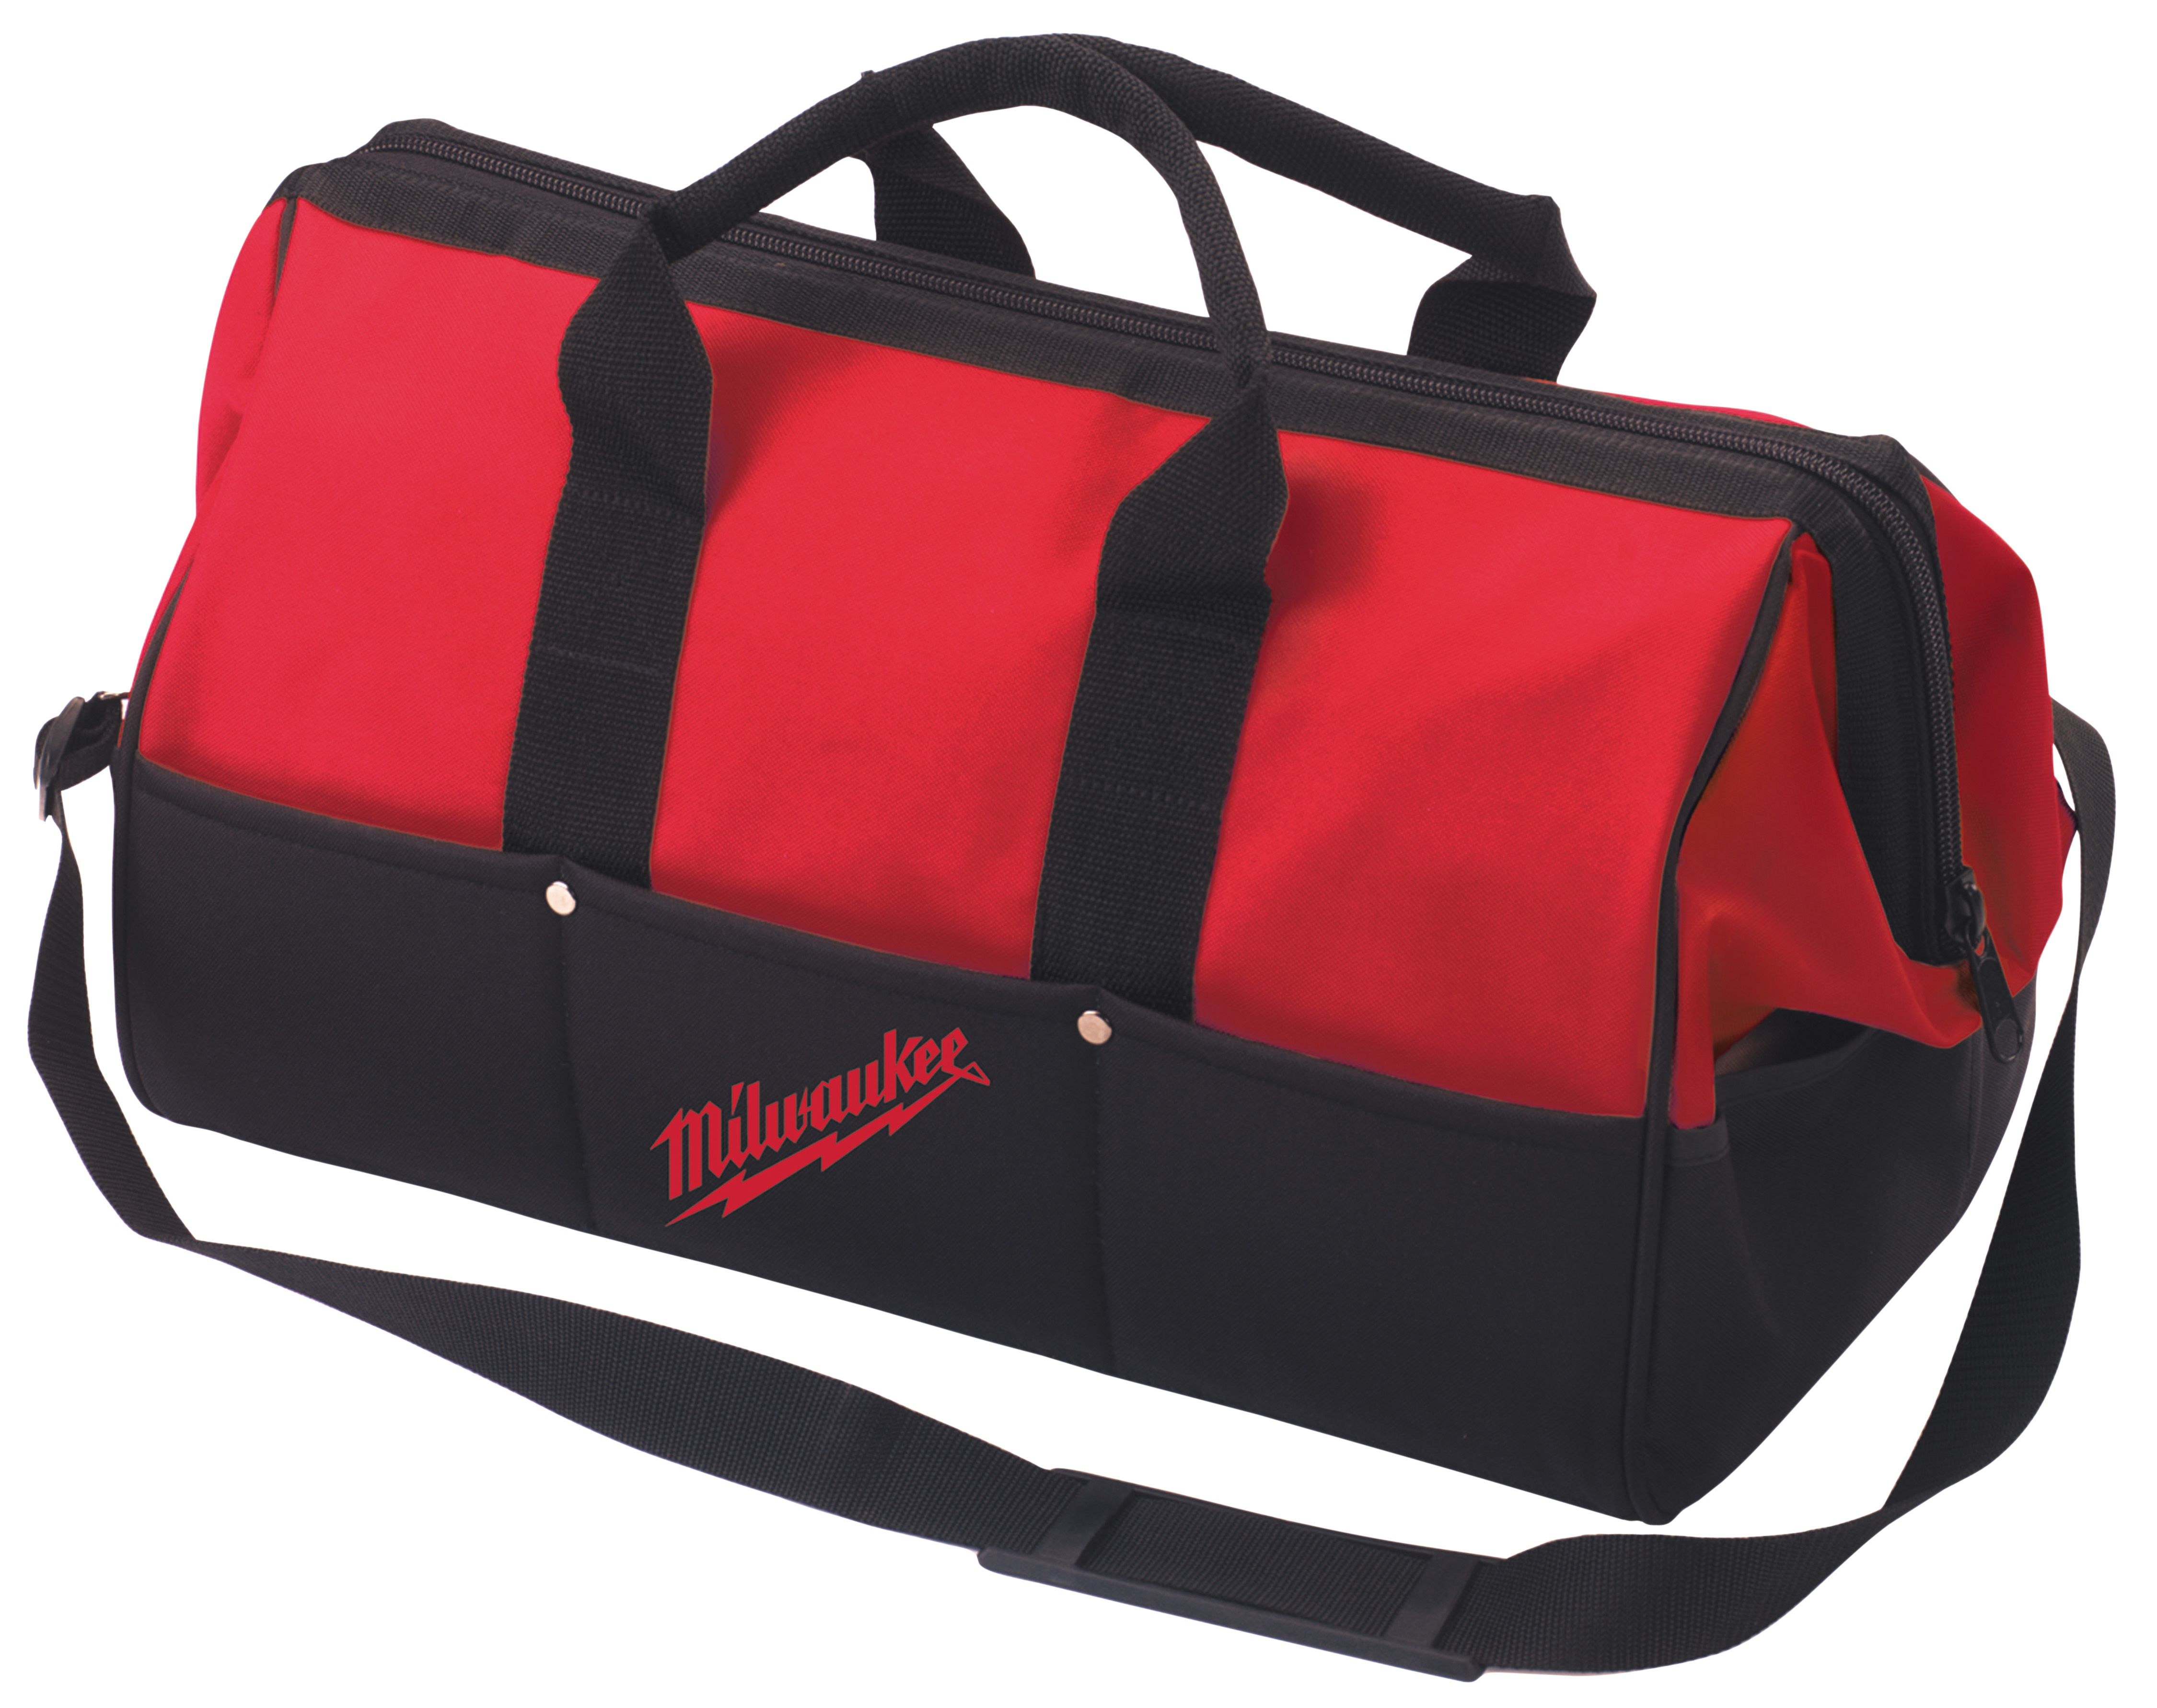 Soft side contractor bag made of tough water resistant 600 denier material. Provides extra storage for job site tools and accessories. Shoulder strap or dual handle straps for easy carrying. Durable zipper closure. 24-1/2 in. long by 13 in. wide by 14 in. high.